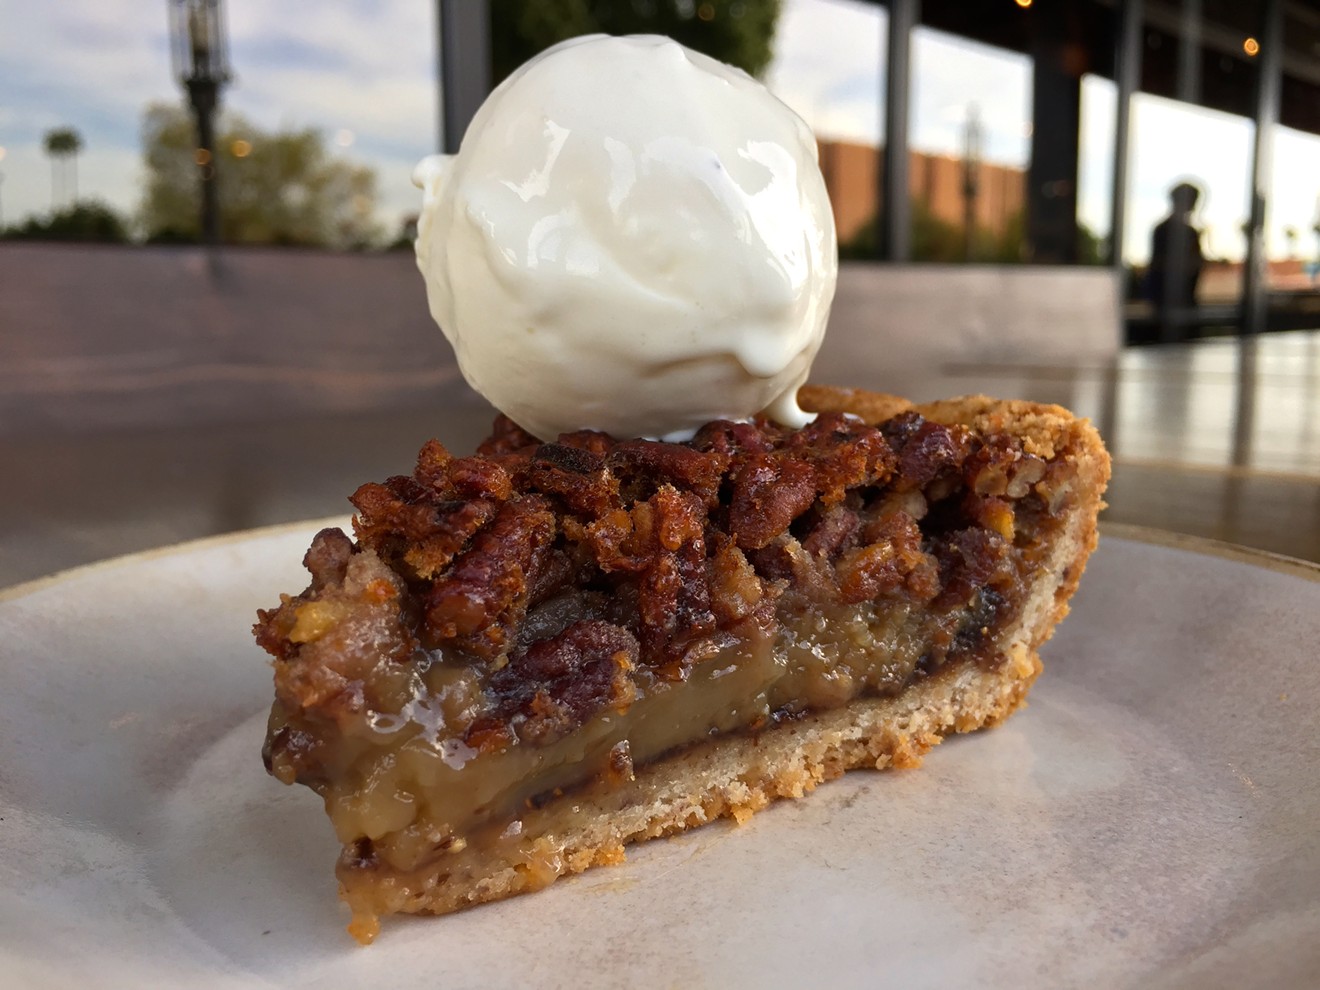 Consider a Fig & Pecan pie from Chef Justin Beckett this Thanksgiving.